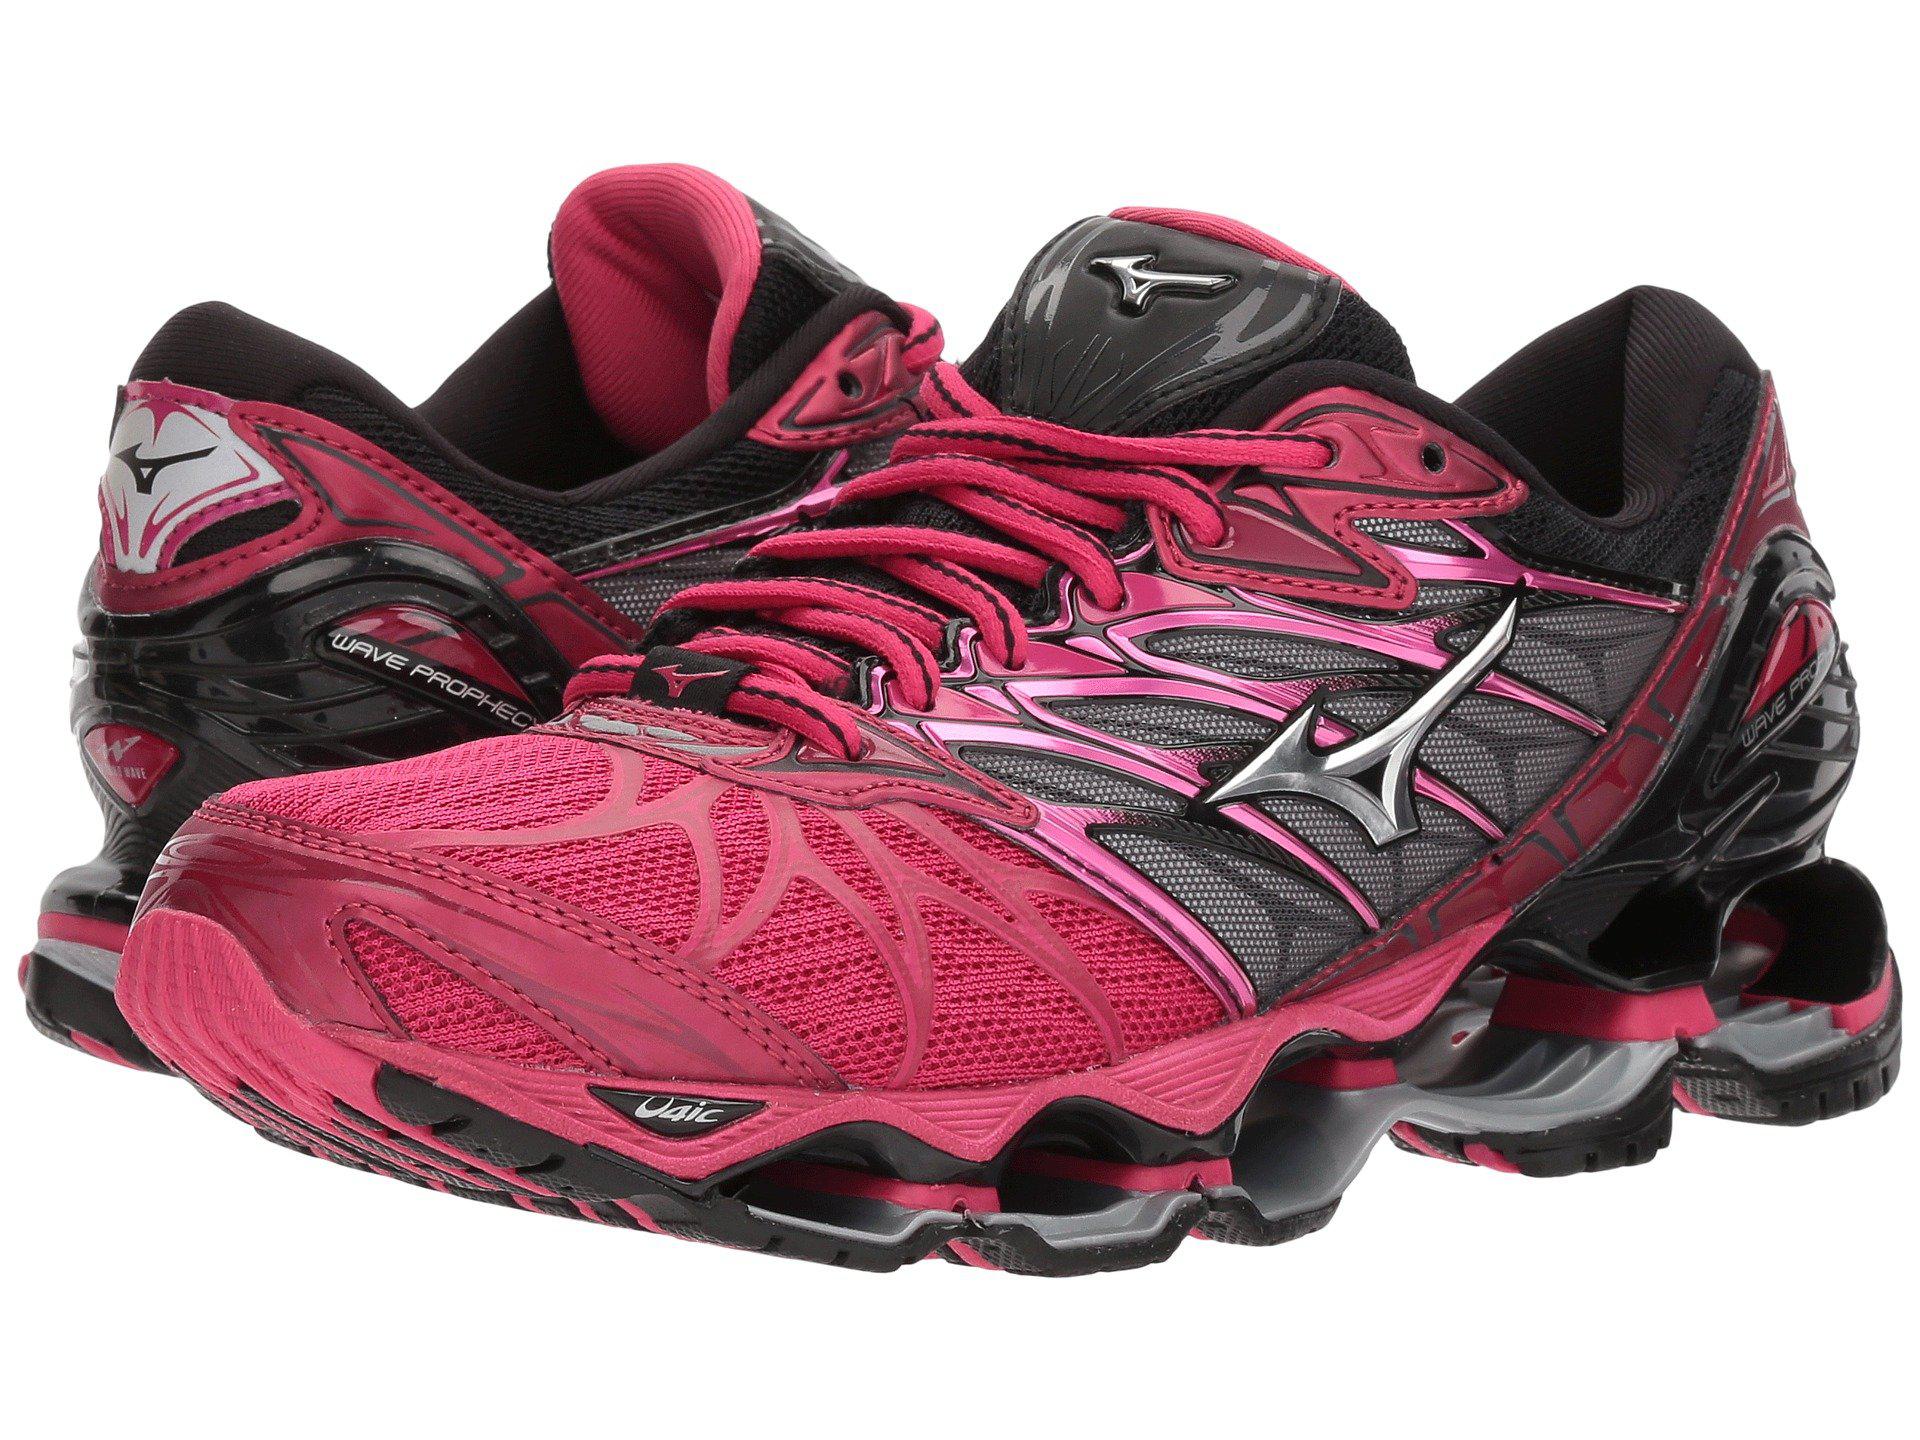 Mizuno Wave Prophecy 7 (black/silver) Women's Running Shoes in Pink | Lyst